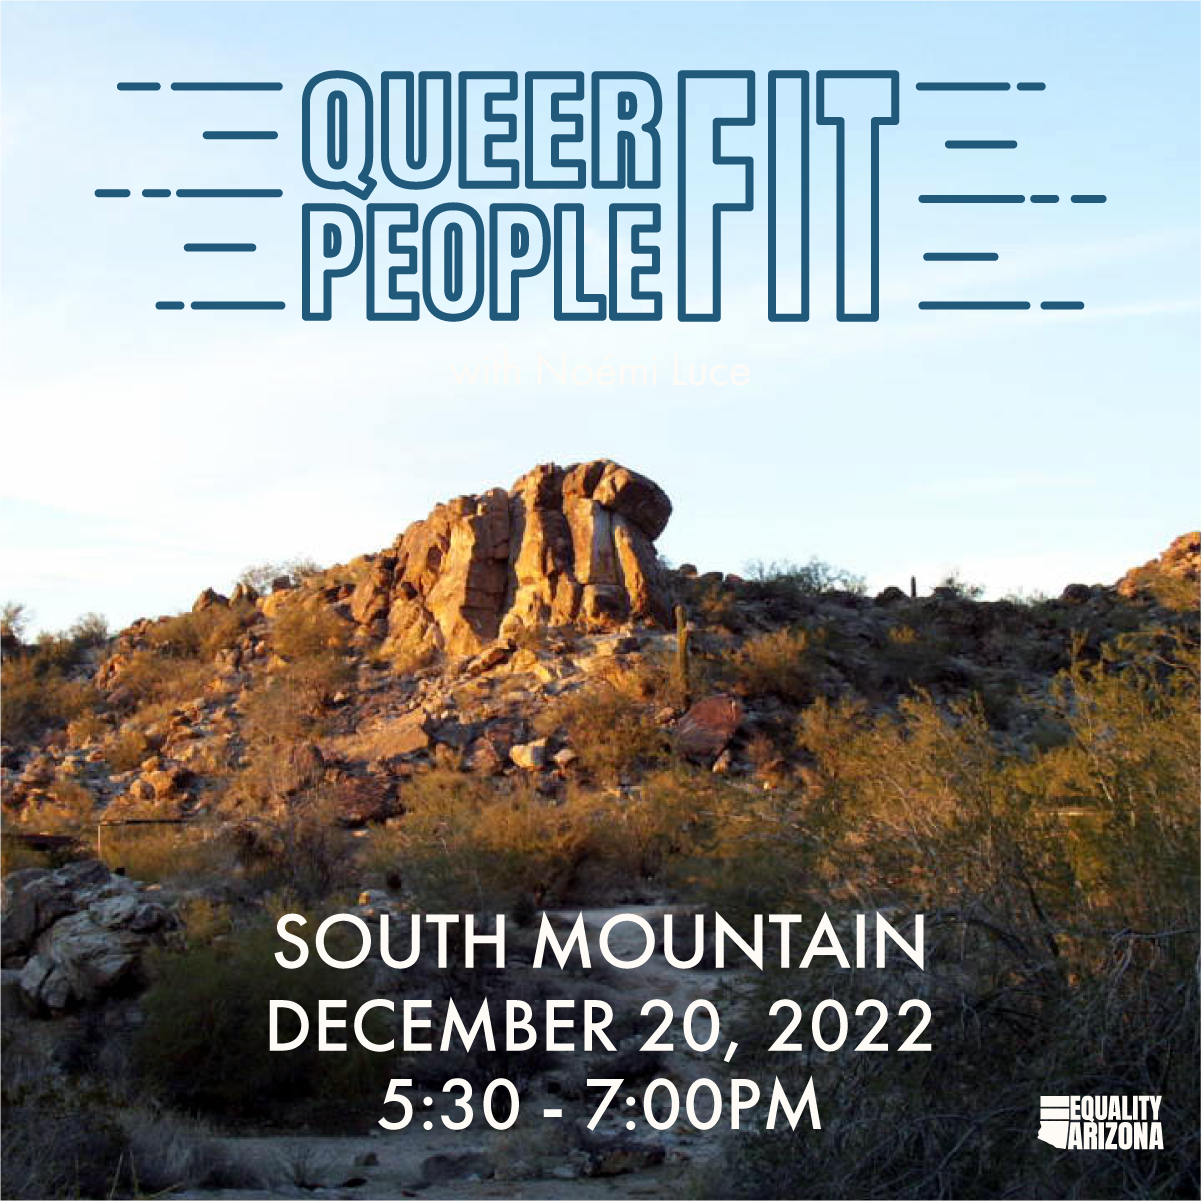 Over a photo from the South Mountain Preserve, large text reads “Queer People Fit. There is more text that says “South Mountain. December 20. 5:30 to 7:30 PM.” In the bottom right corner of the image there is a logo for Equality Arizona.